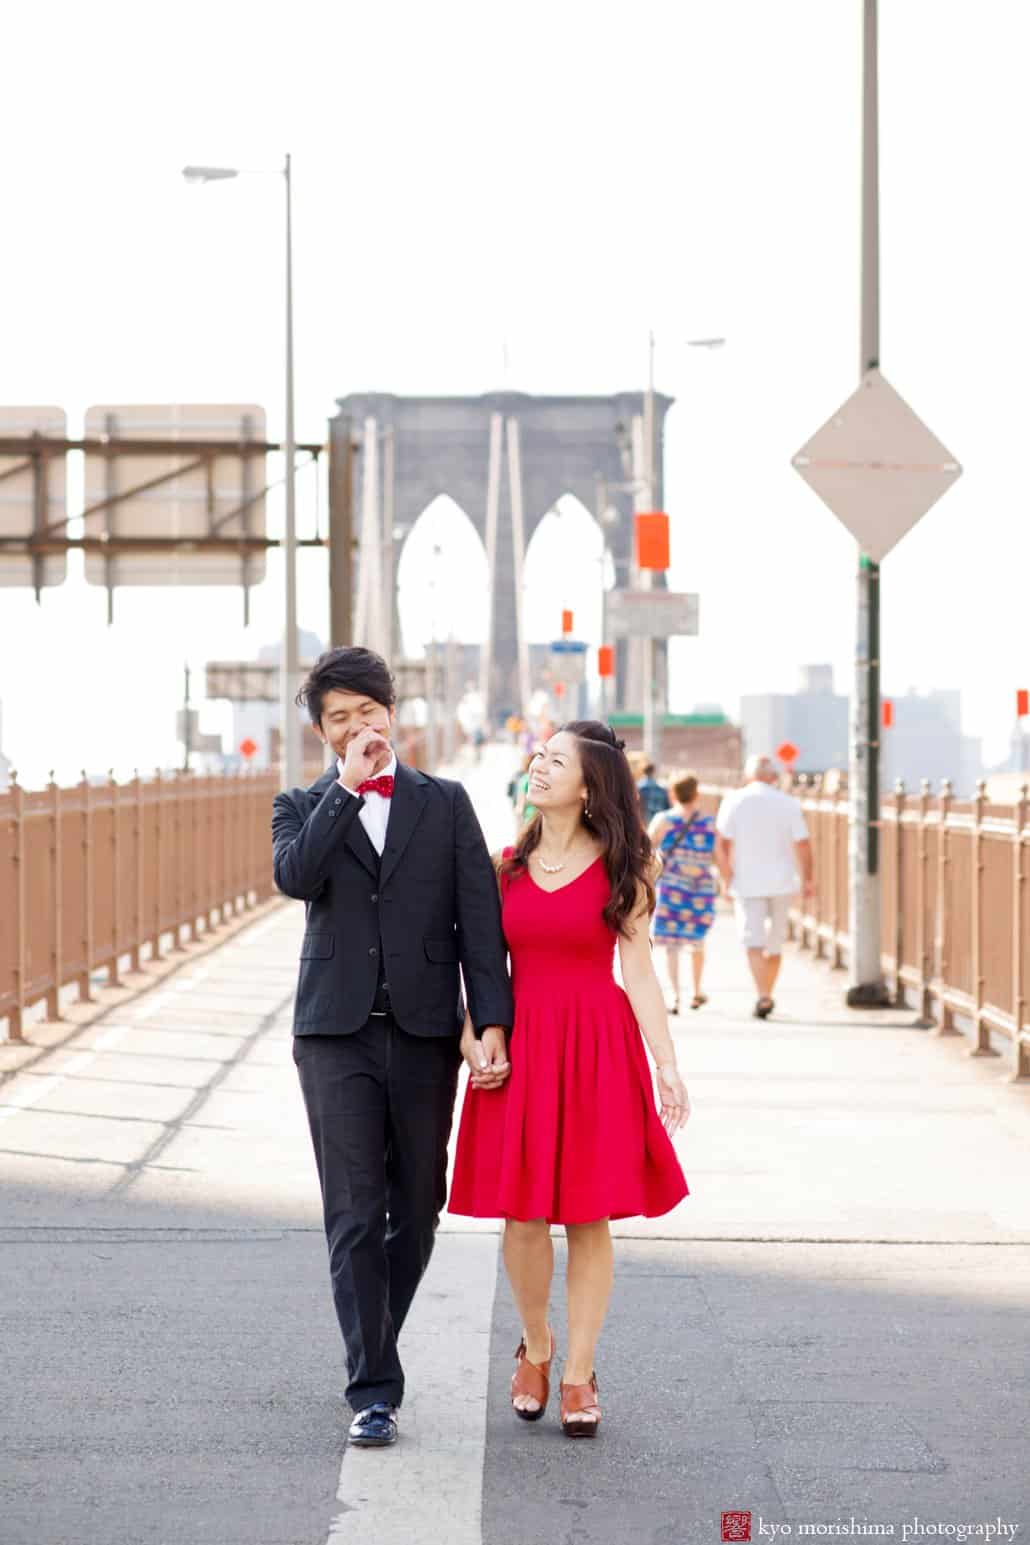 Japanese couple laughing as they walk along the Brooklyn Bridge; engagement photo photographed by Kyo Morishima